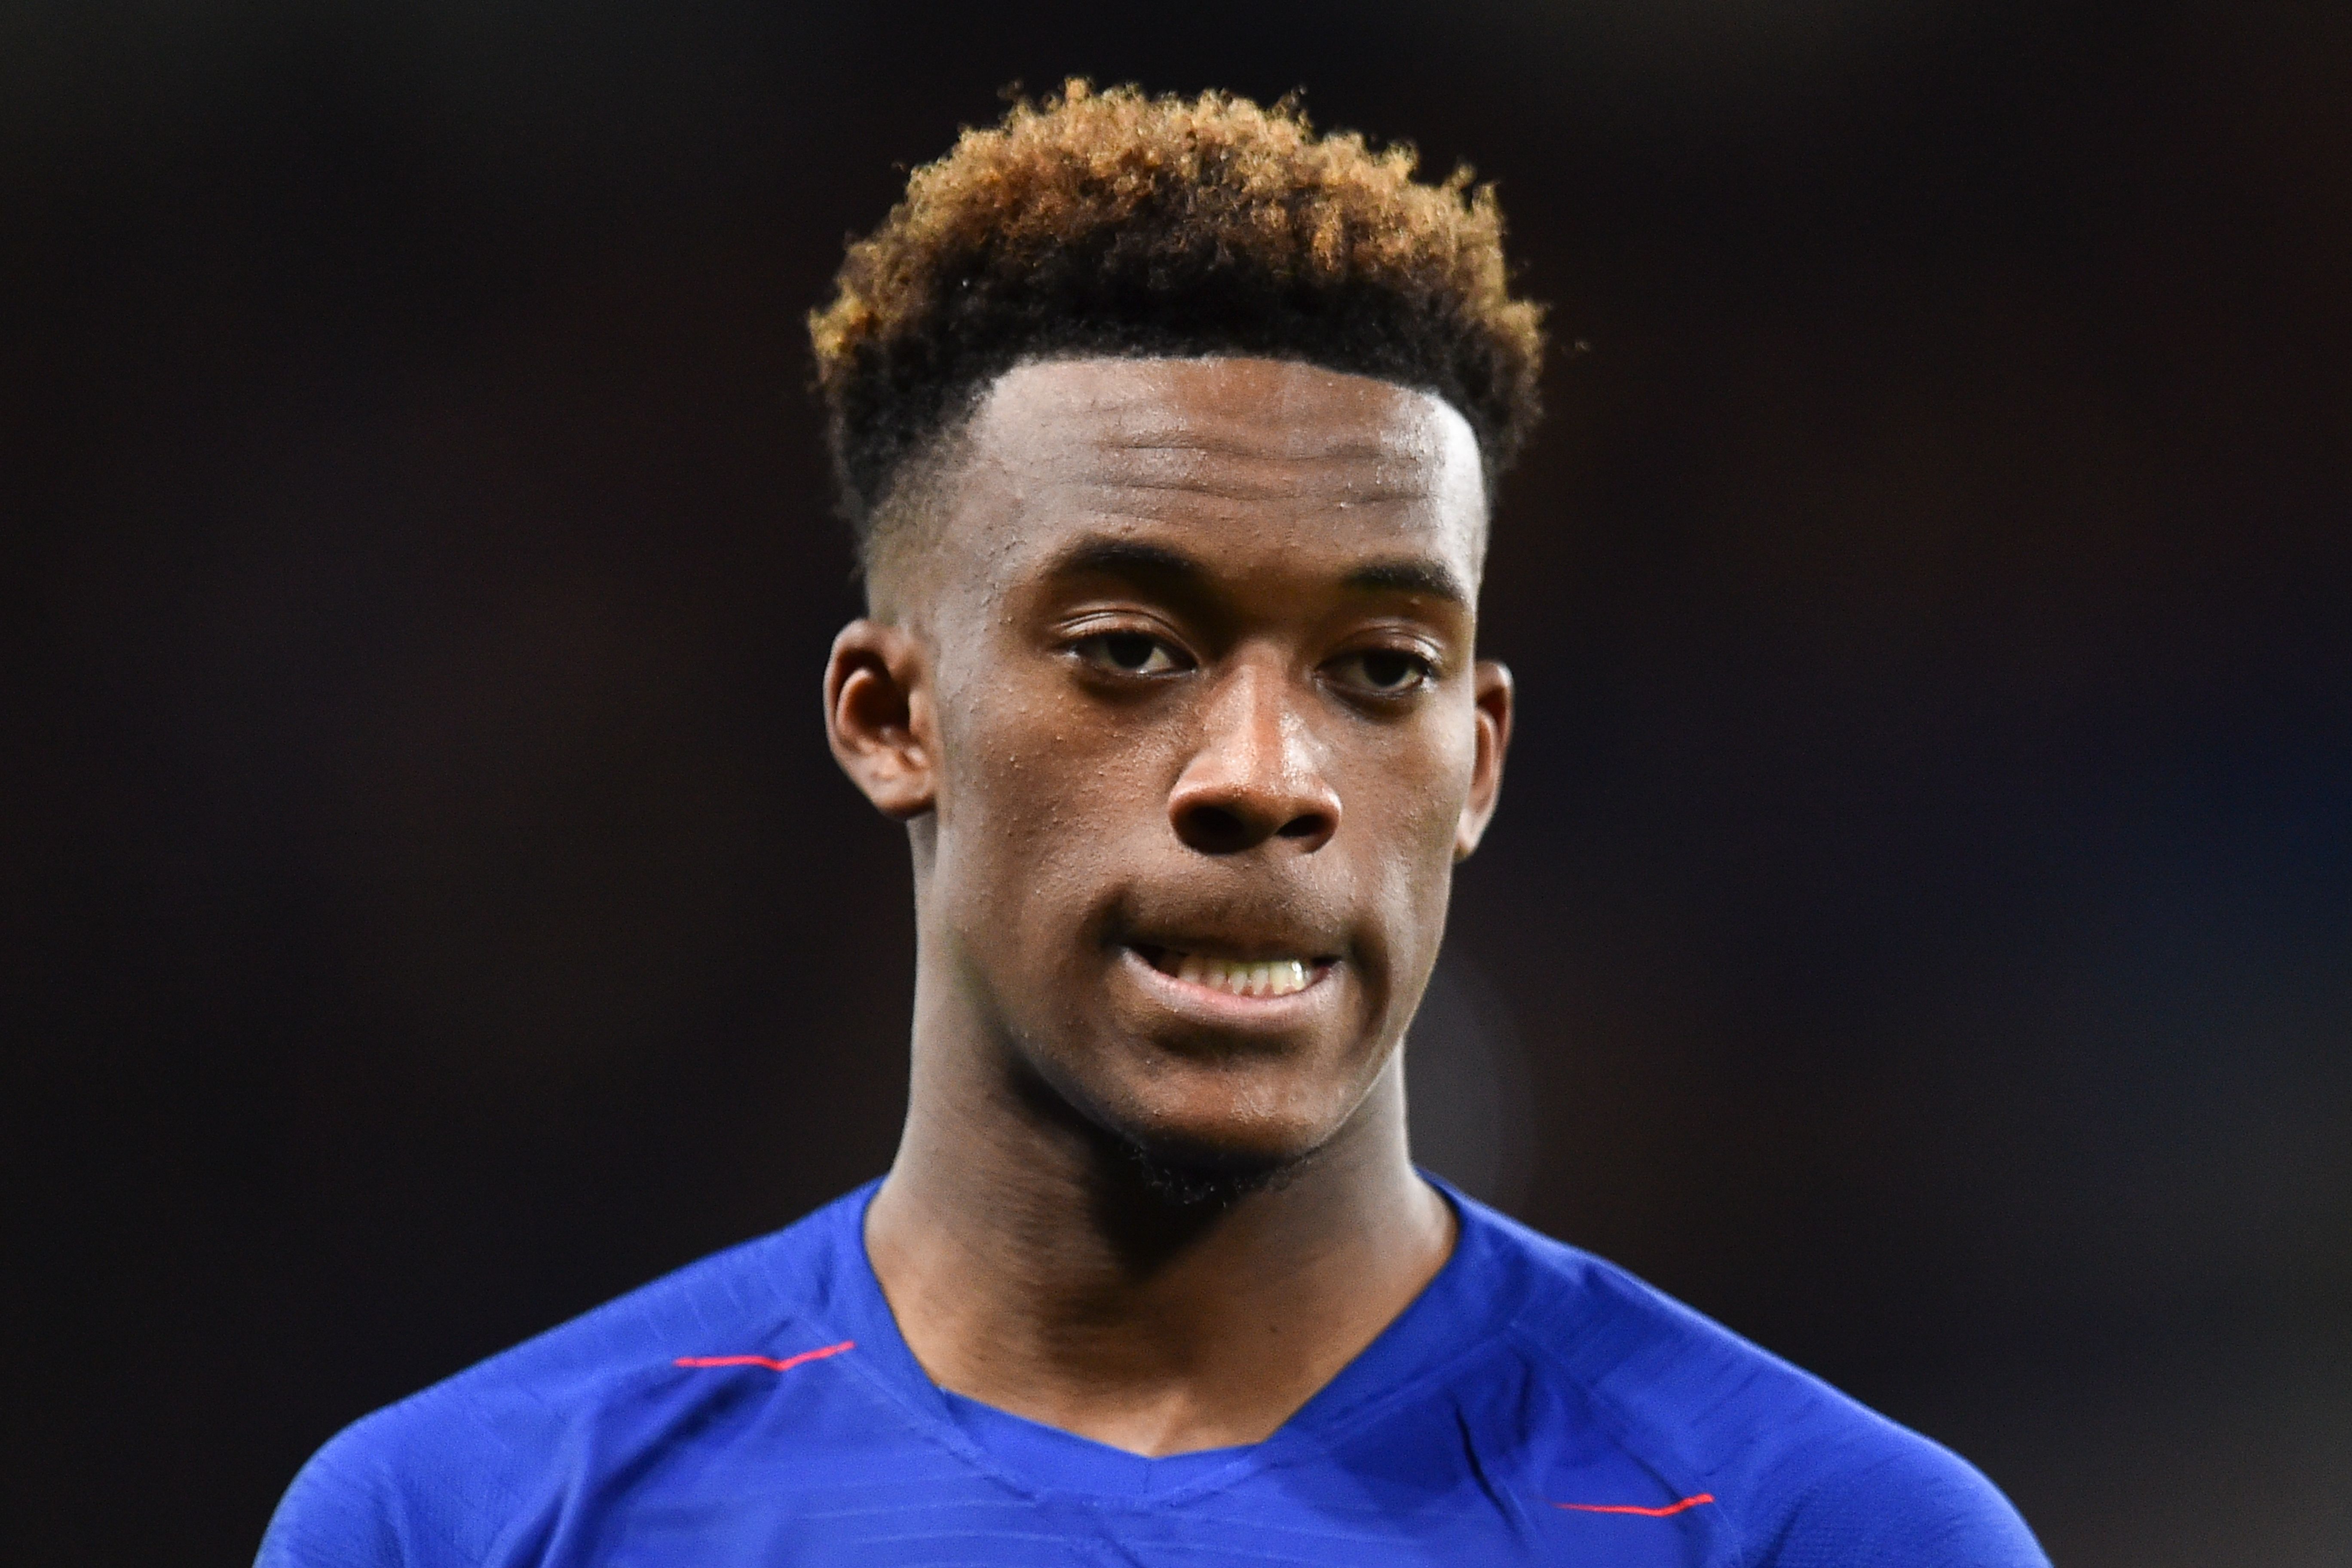 Chelsea's English midfielder Callum Hudson-Odoi reacts during the English FA Cup fourth round football match between Chelsea and Sheffield Wednesday at Stamford Bridge in London on January 27, 2019. (Photo by Glyn KIRK / AFP) / RESTRICTED TO EDITORIAL USE. No use with unauthorized audio, video, data, fixture lists, club/league logos or 'live' services. Online in-match use limited to 120 images. An additional 40 images may be used in extra time. No video emulation. Social media in-match use limited to 120 images. An additional 40 images may be used in extra time. No use in betting publications, games or single club/league/player publications. /         (Photo credit should read GLYN KIRK/AFP/Getty Images)